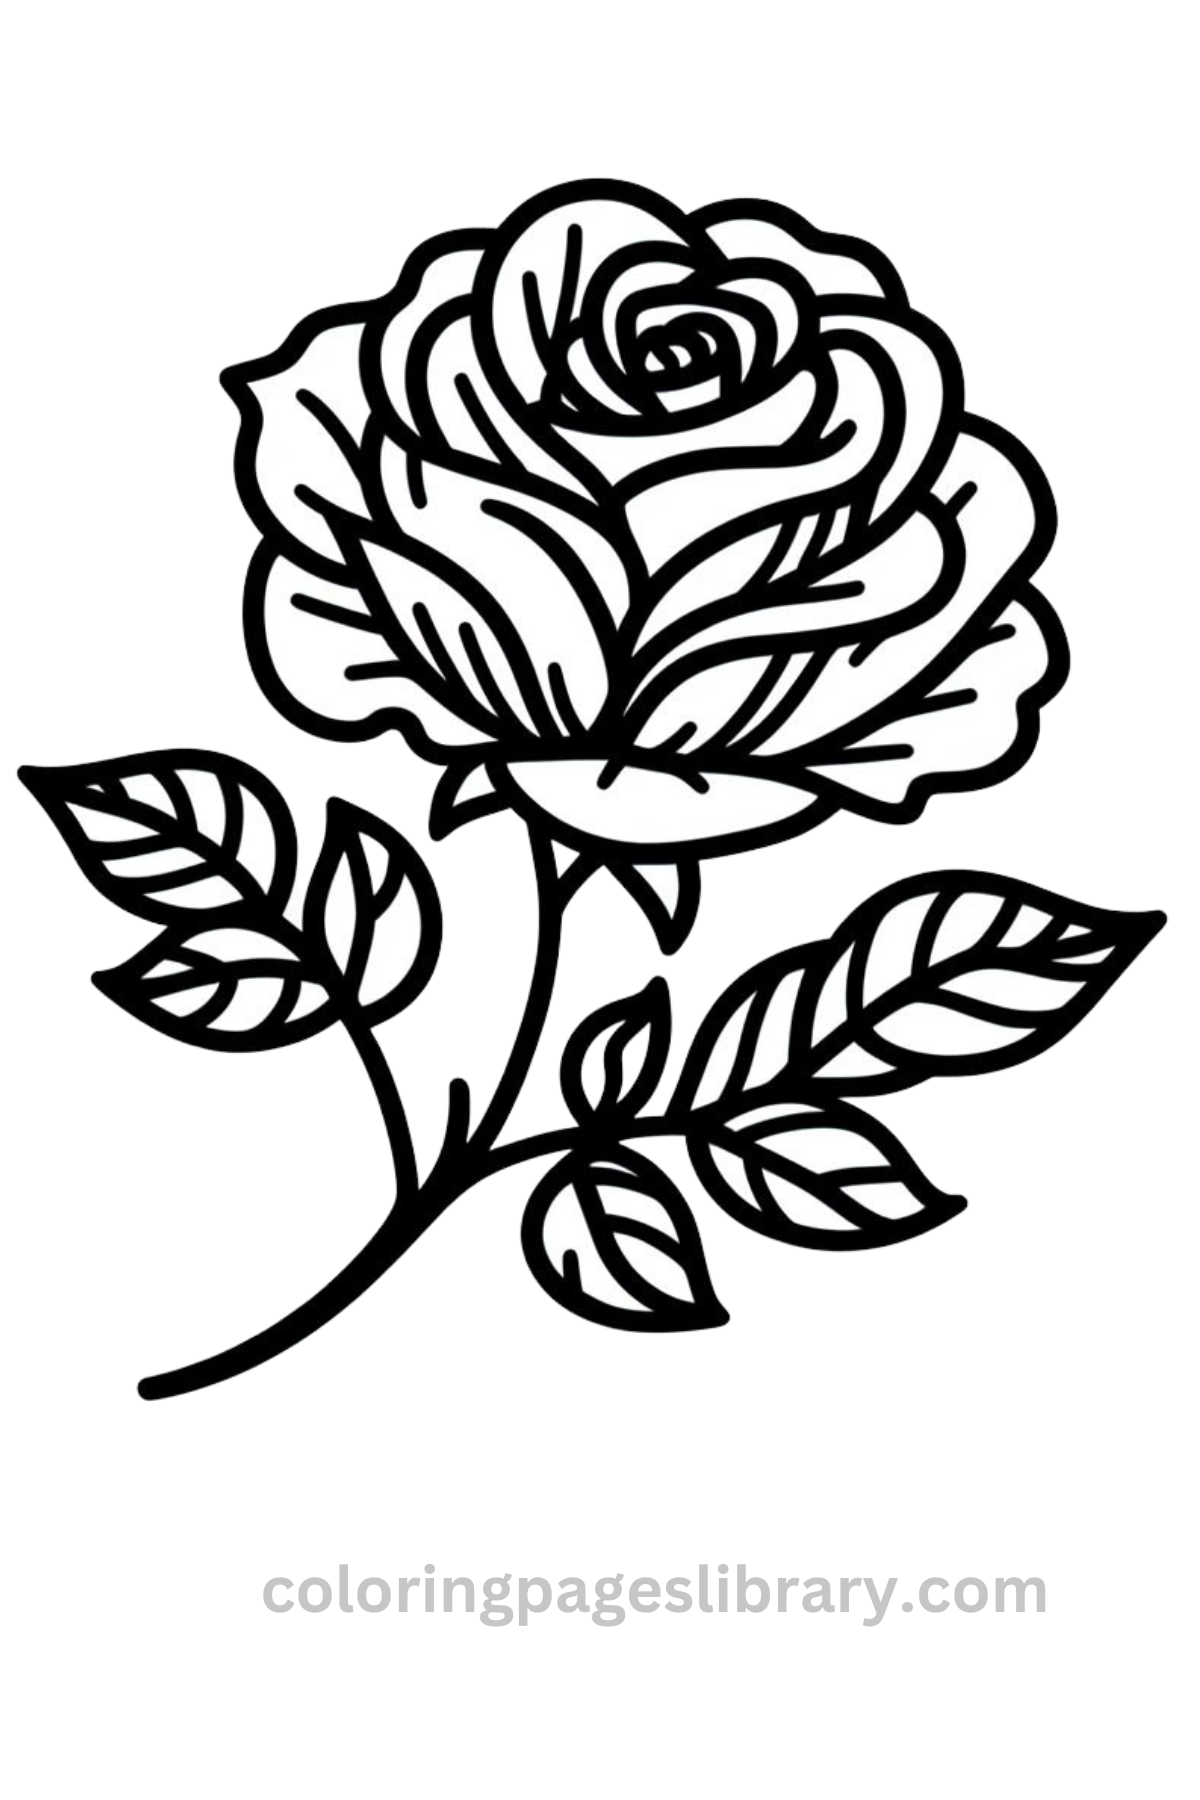 Rose coloring page for kids (2)